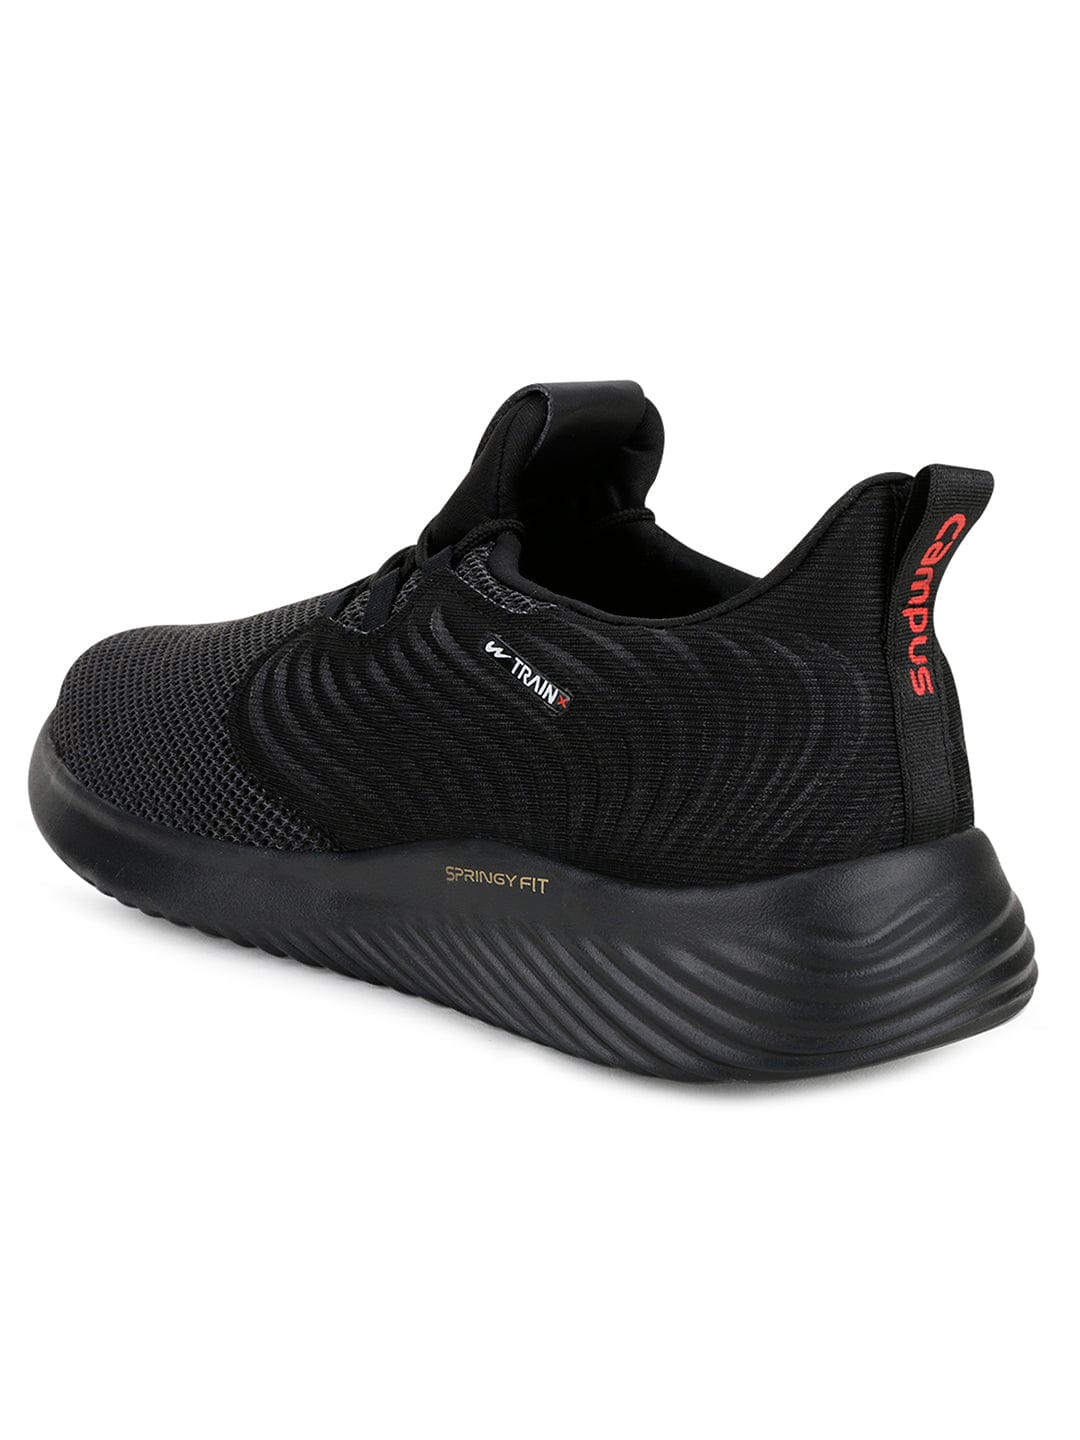 ACTIV RUNNING SHOES - Lime*Black | Activ Abou Alaa